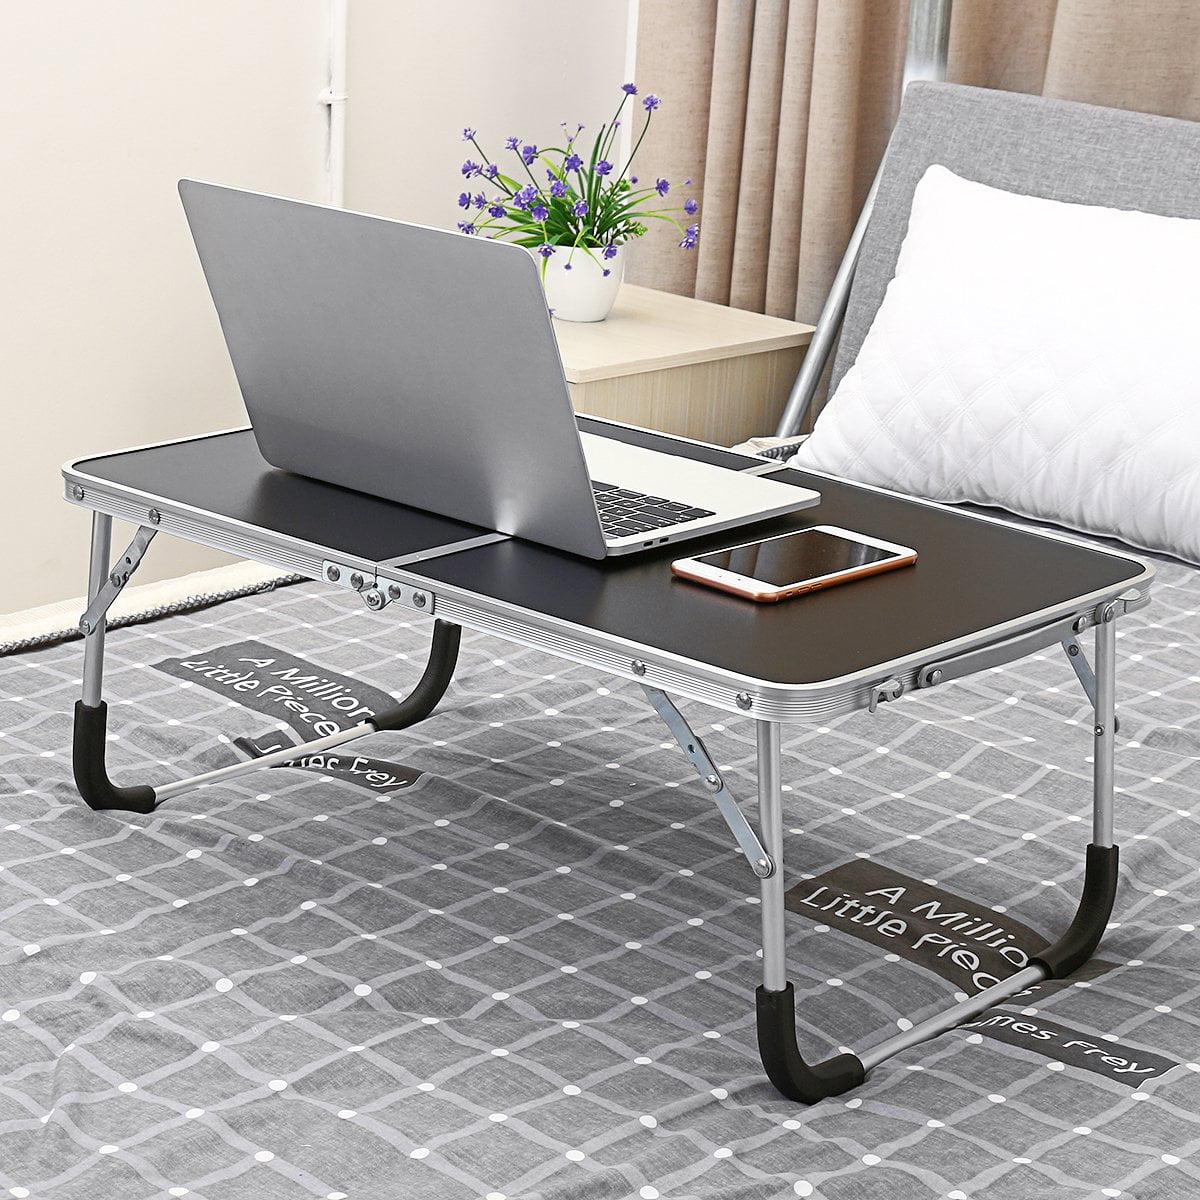 A Bed Desk Portable Tray Laptop Table Notebook Stand Reading Holder with Foldable Legs & Cup Slot Reading Book Watching Movie on Bed/Couch/Sofa